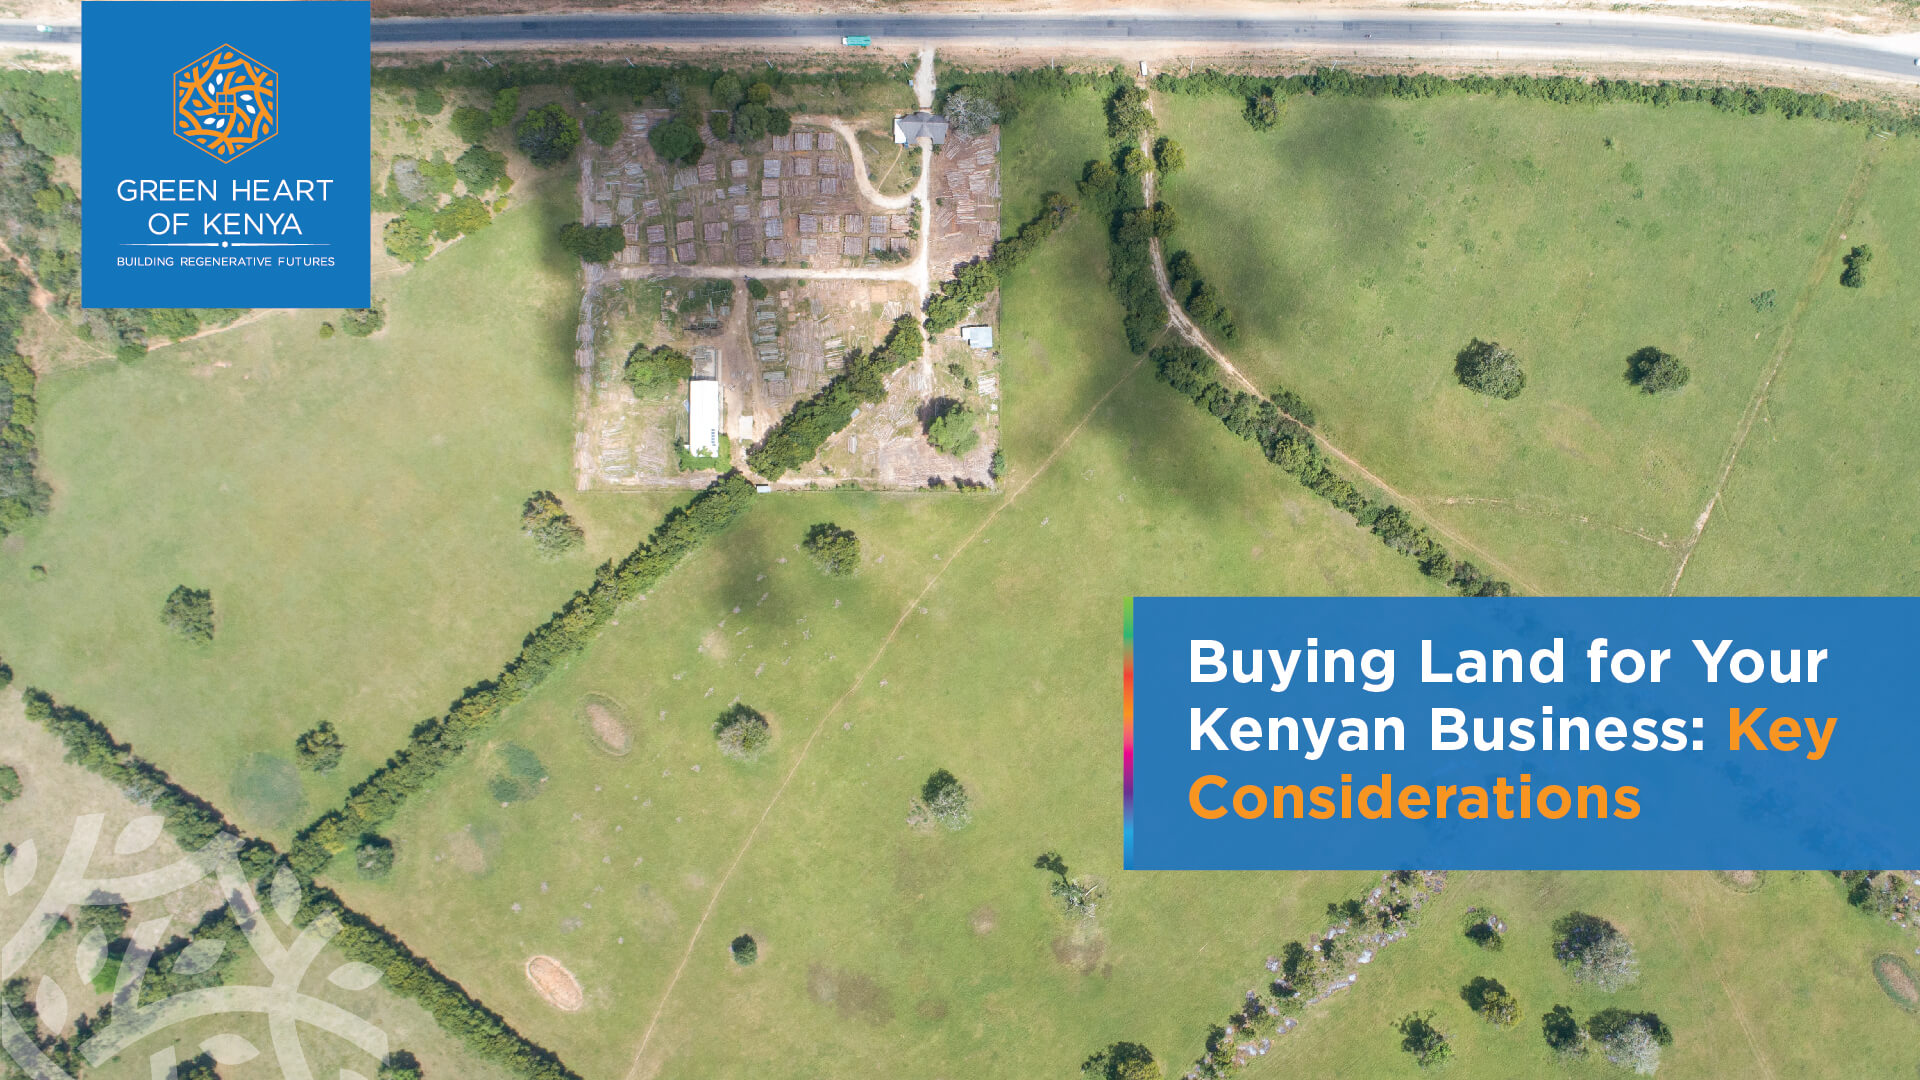 Key considerations on buying land for your kenyan business